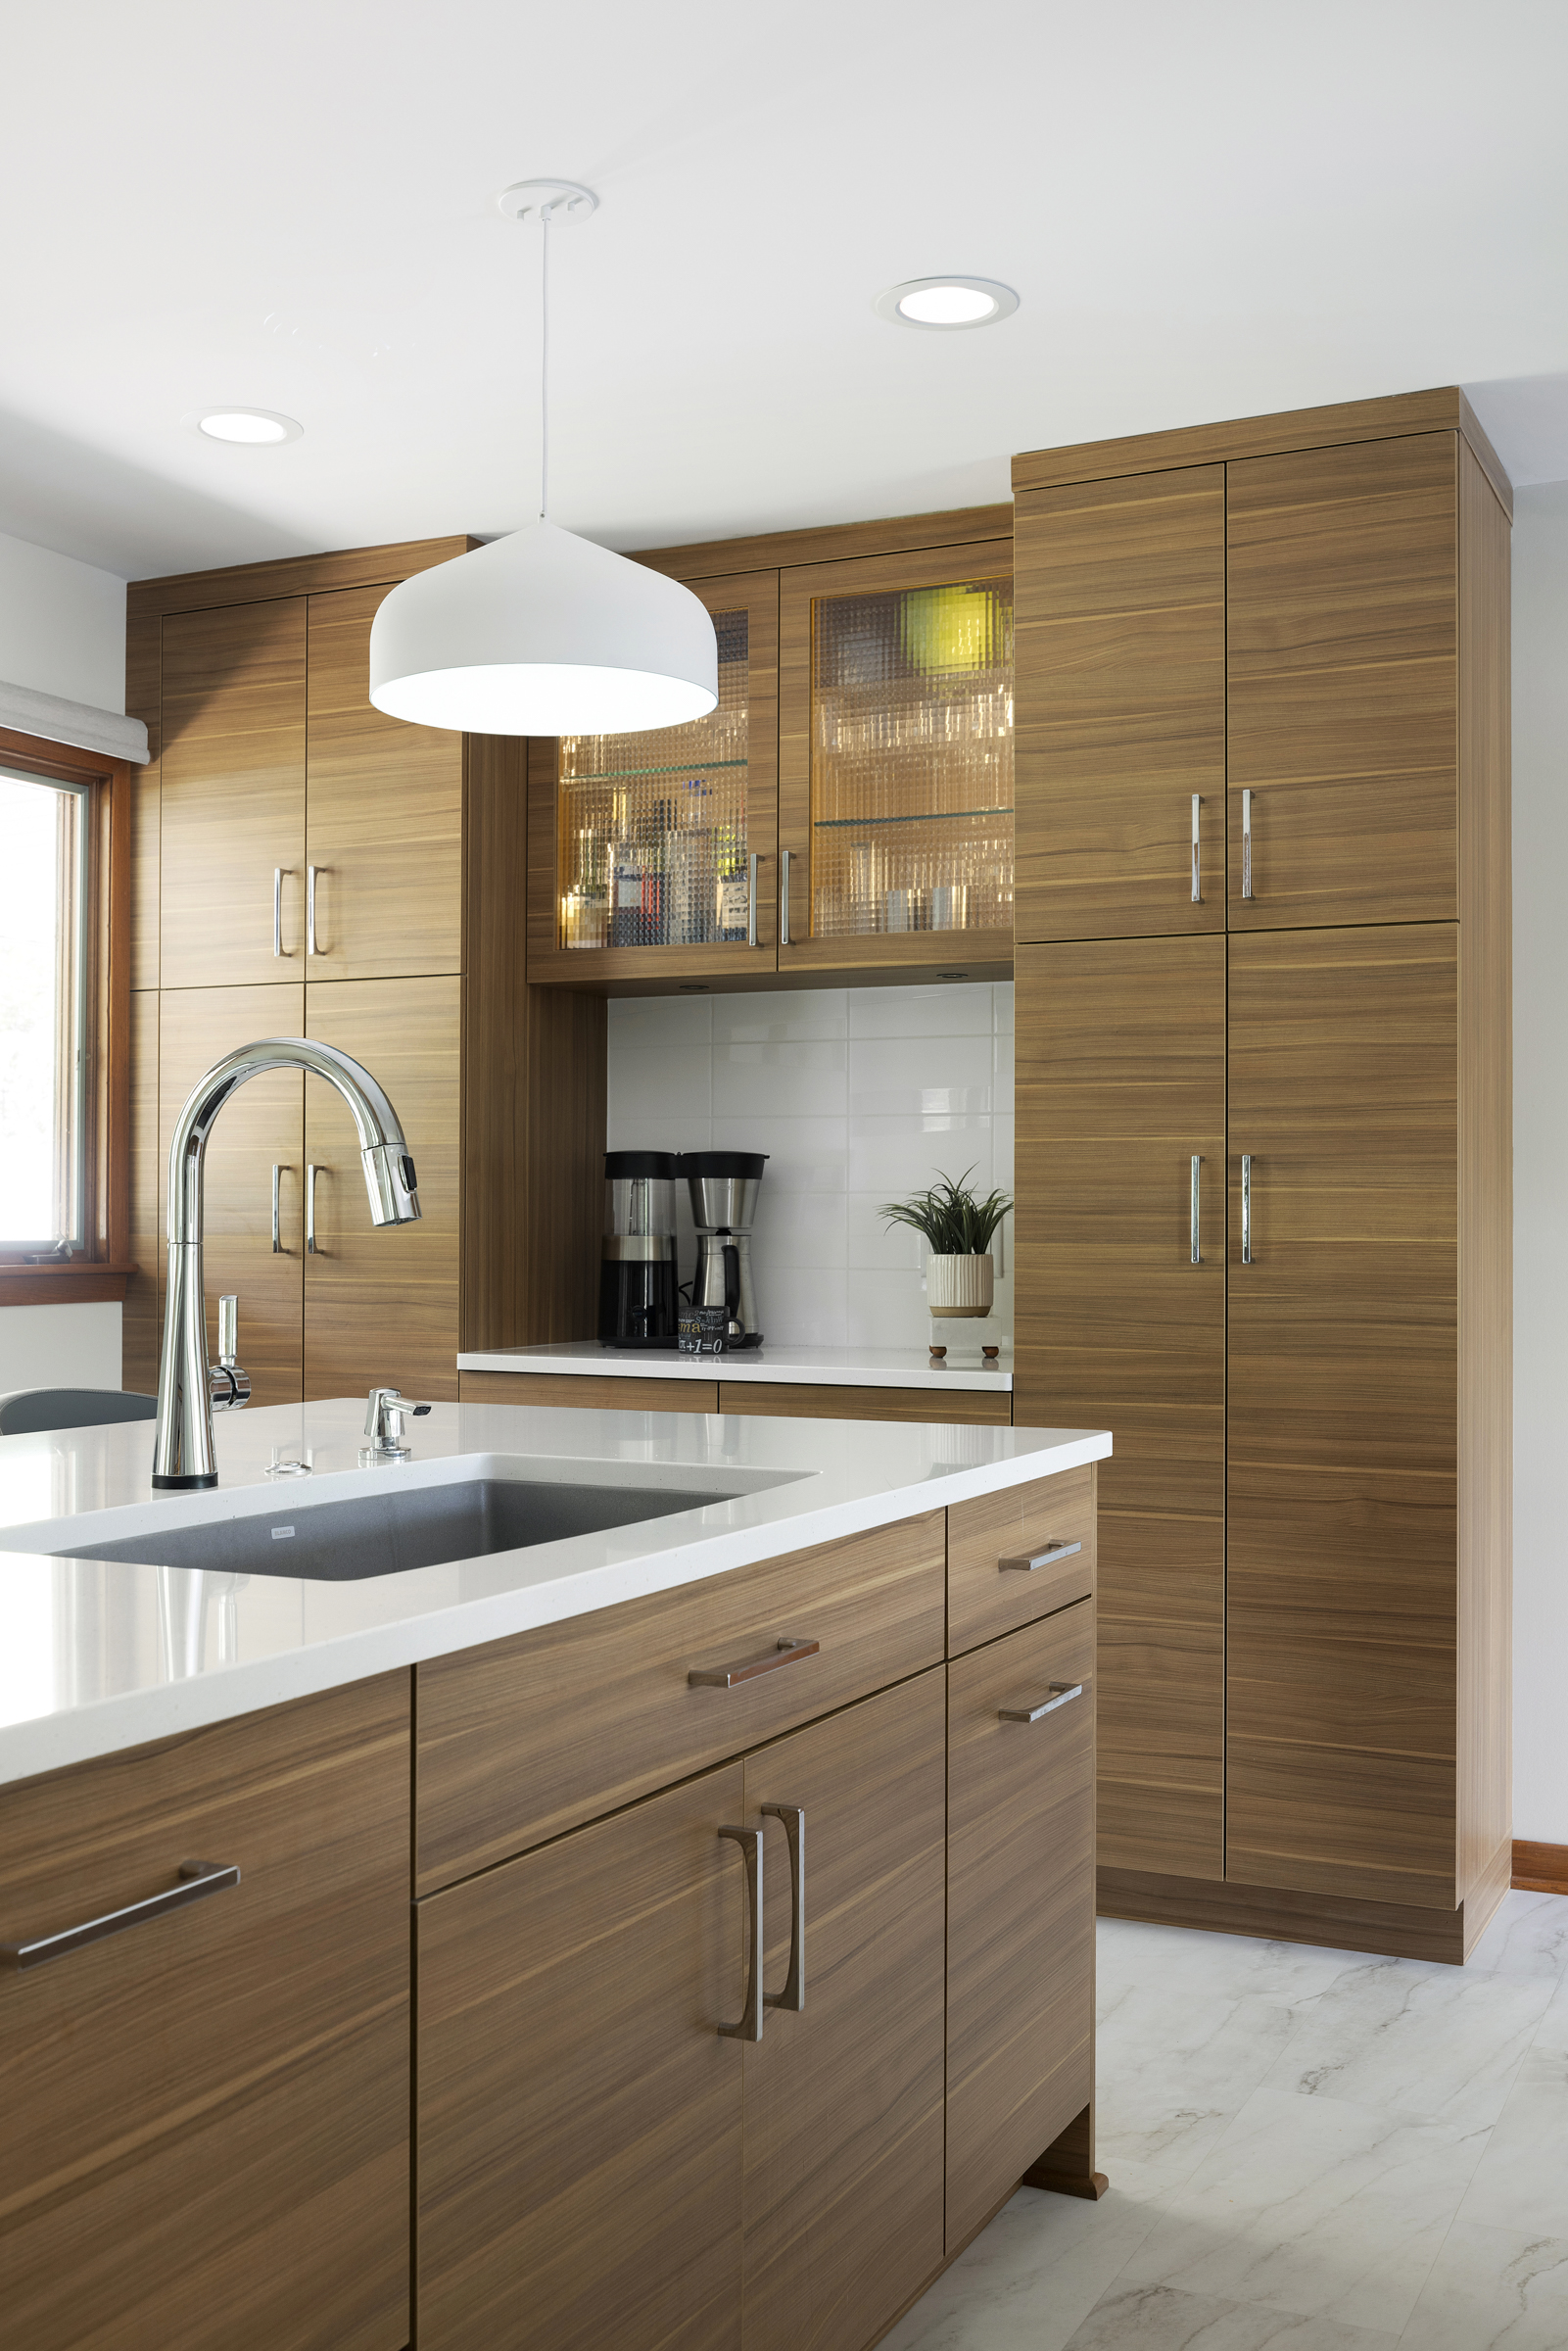 Modern kitchen remodel with medium toned wood cabinets, white countertops, and stainless steel appliances